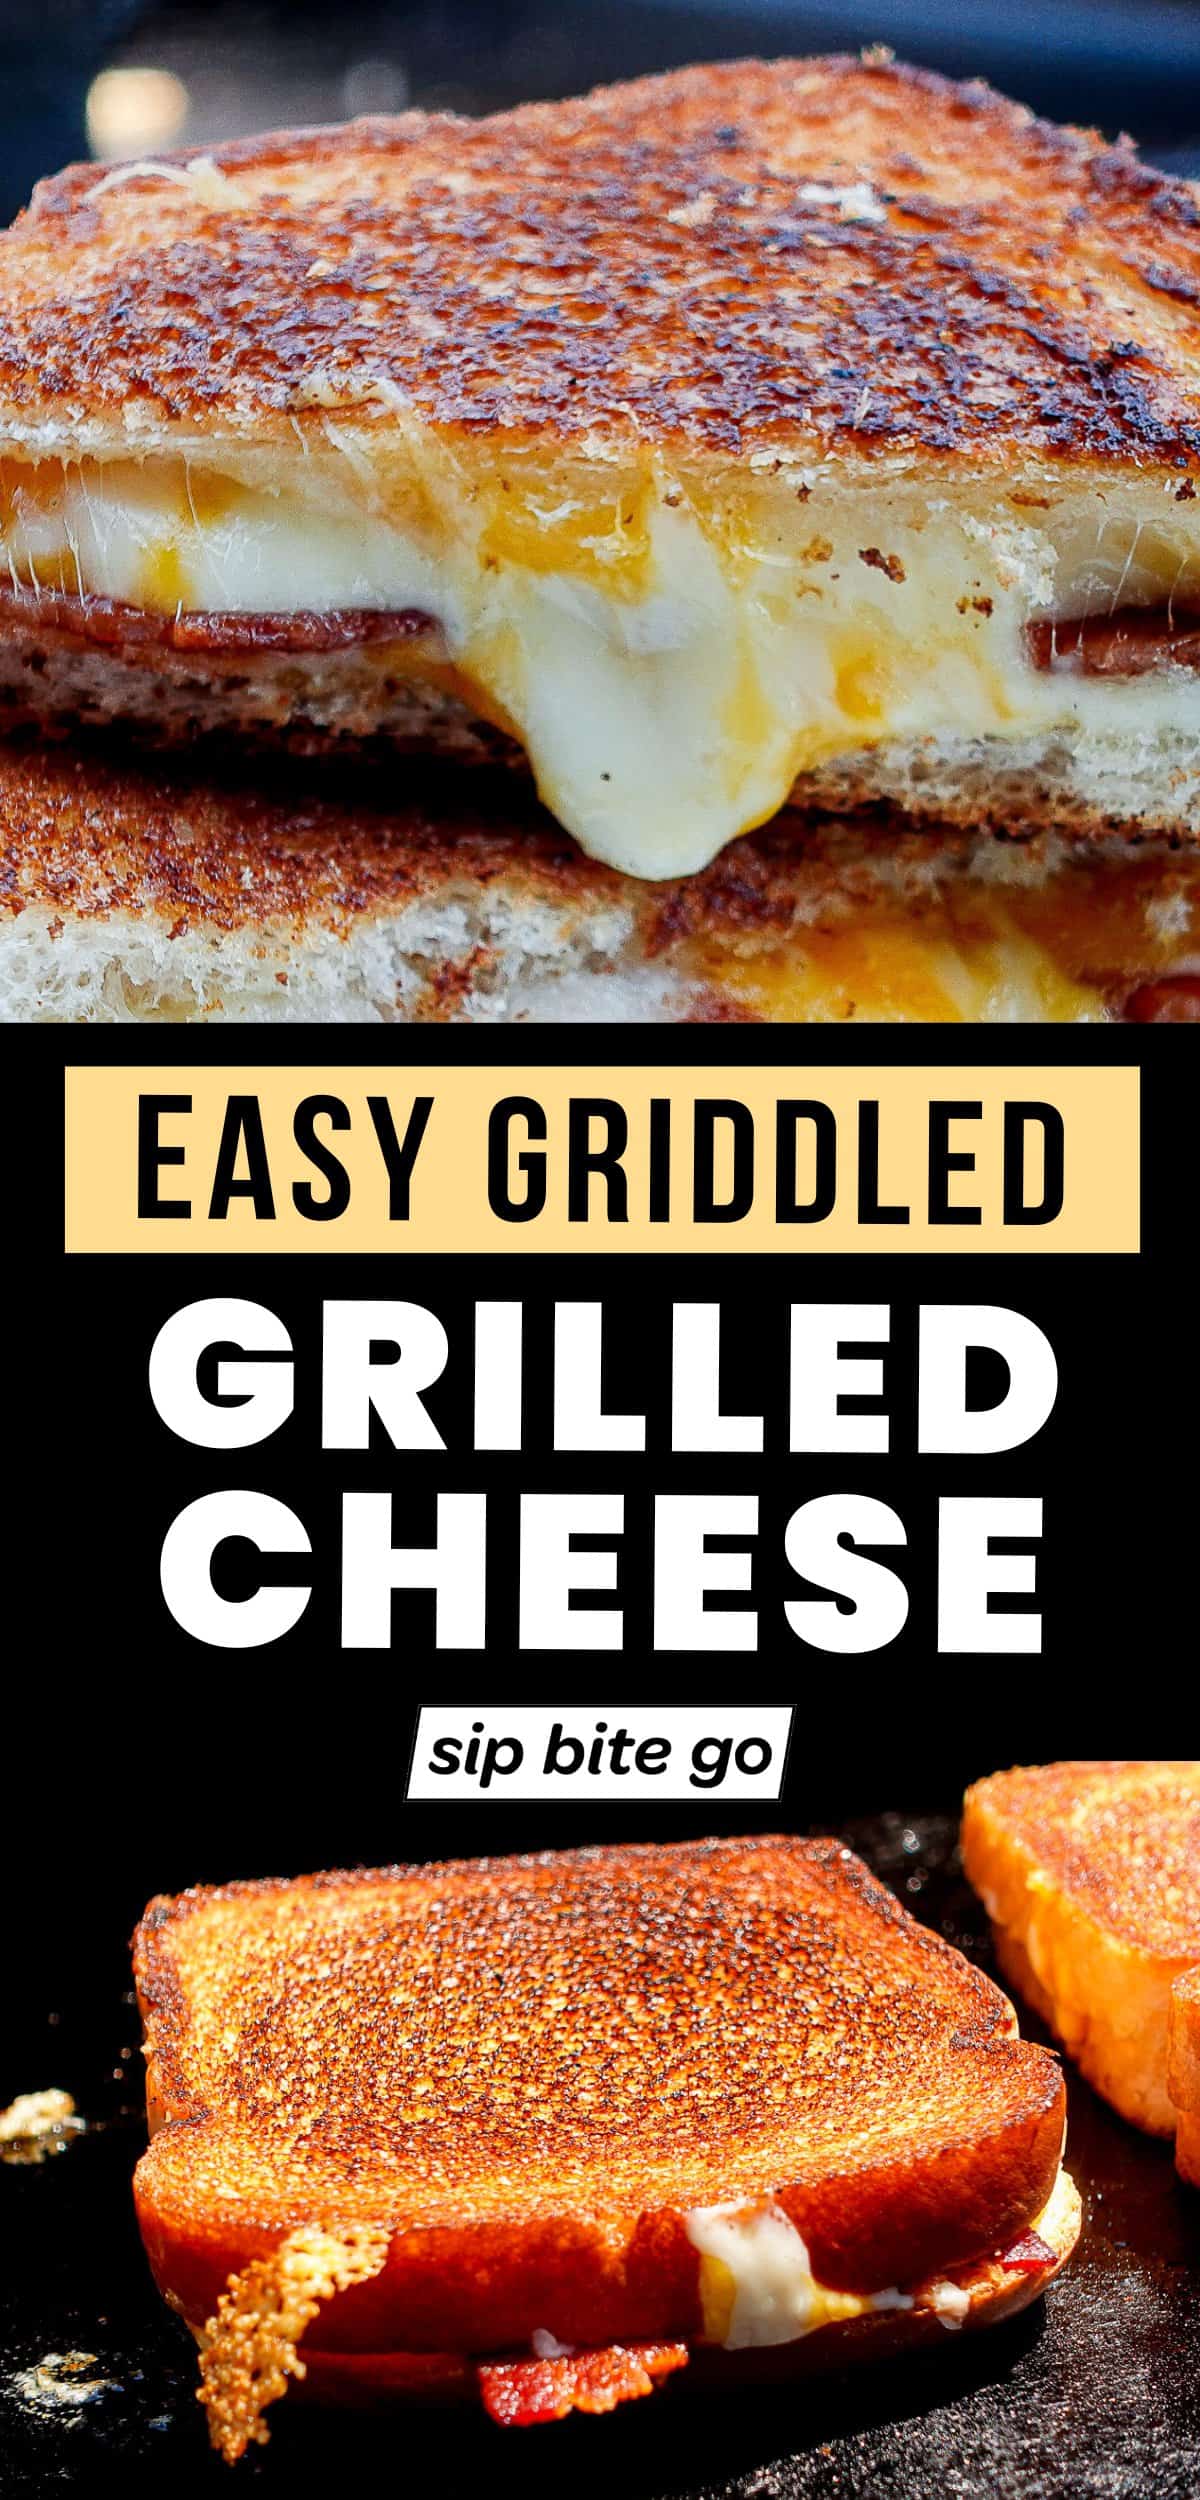 Griddled Grilled Cheese with Bacon Recipe with text overlay